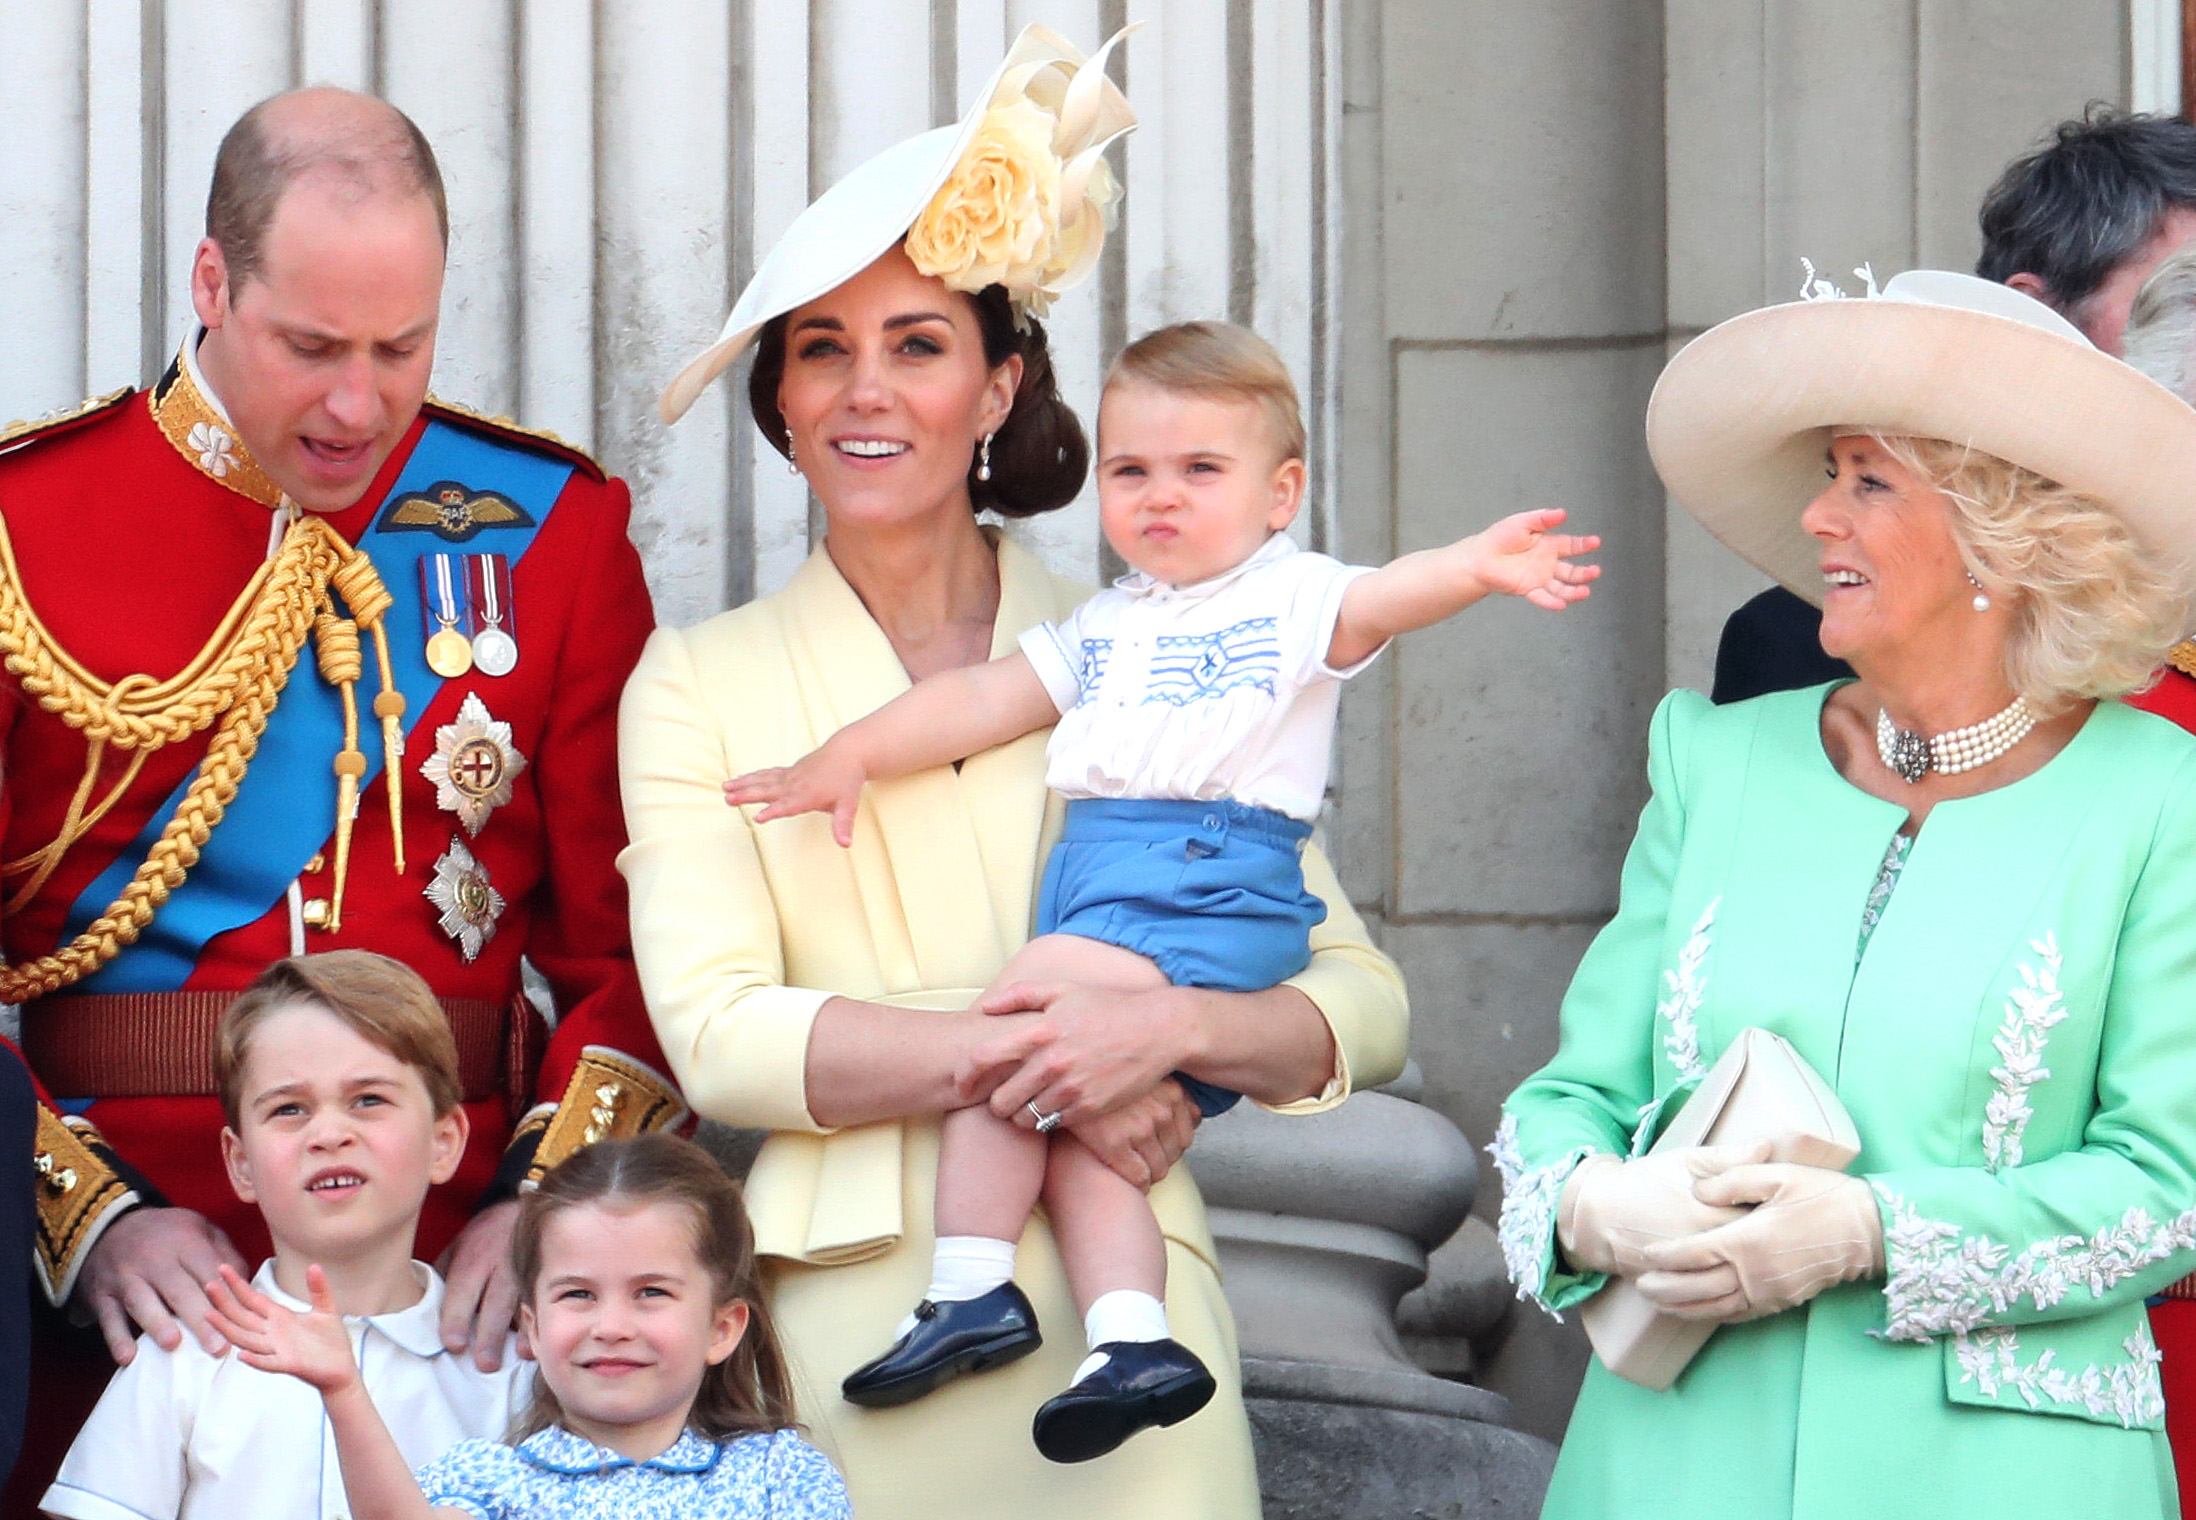 Prince William, Prince George, Princess Charlotte, Princess Catherine, Prince Louis, and Queen Camilla, on the balcony during the Trooping The Colour parade on June 8, 2019, in London. | Source: Getty Images